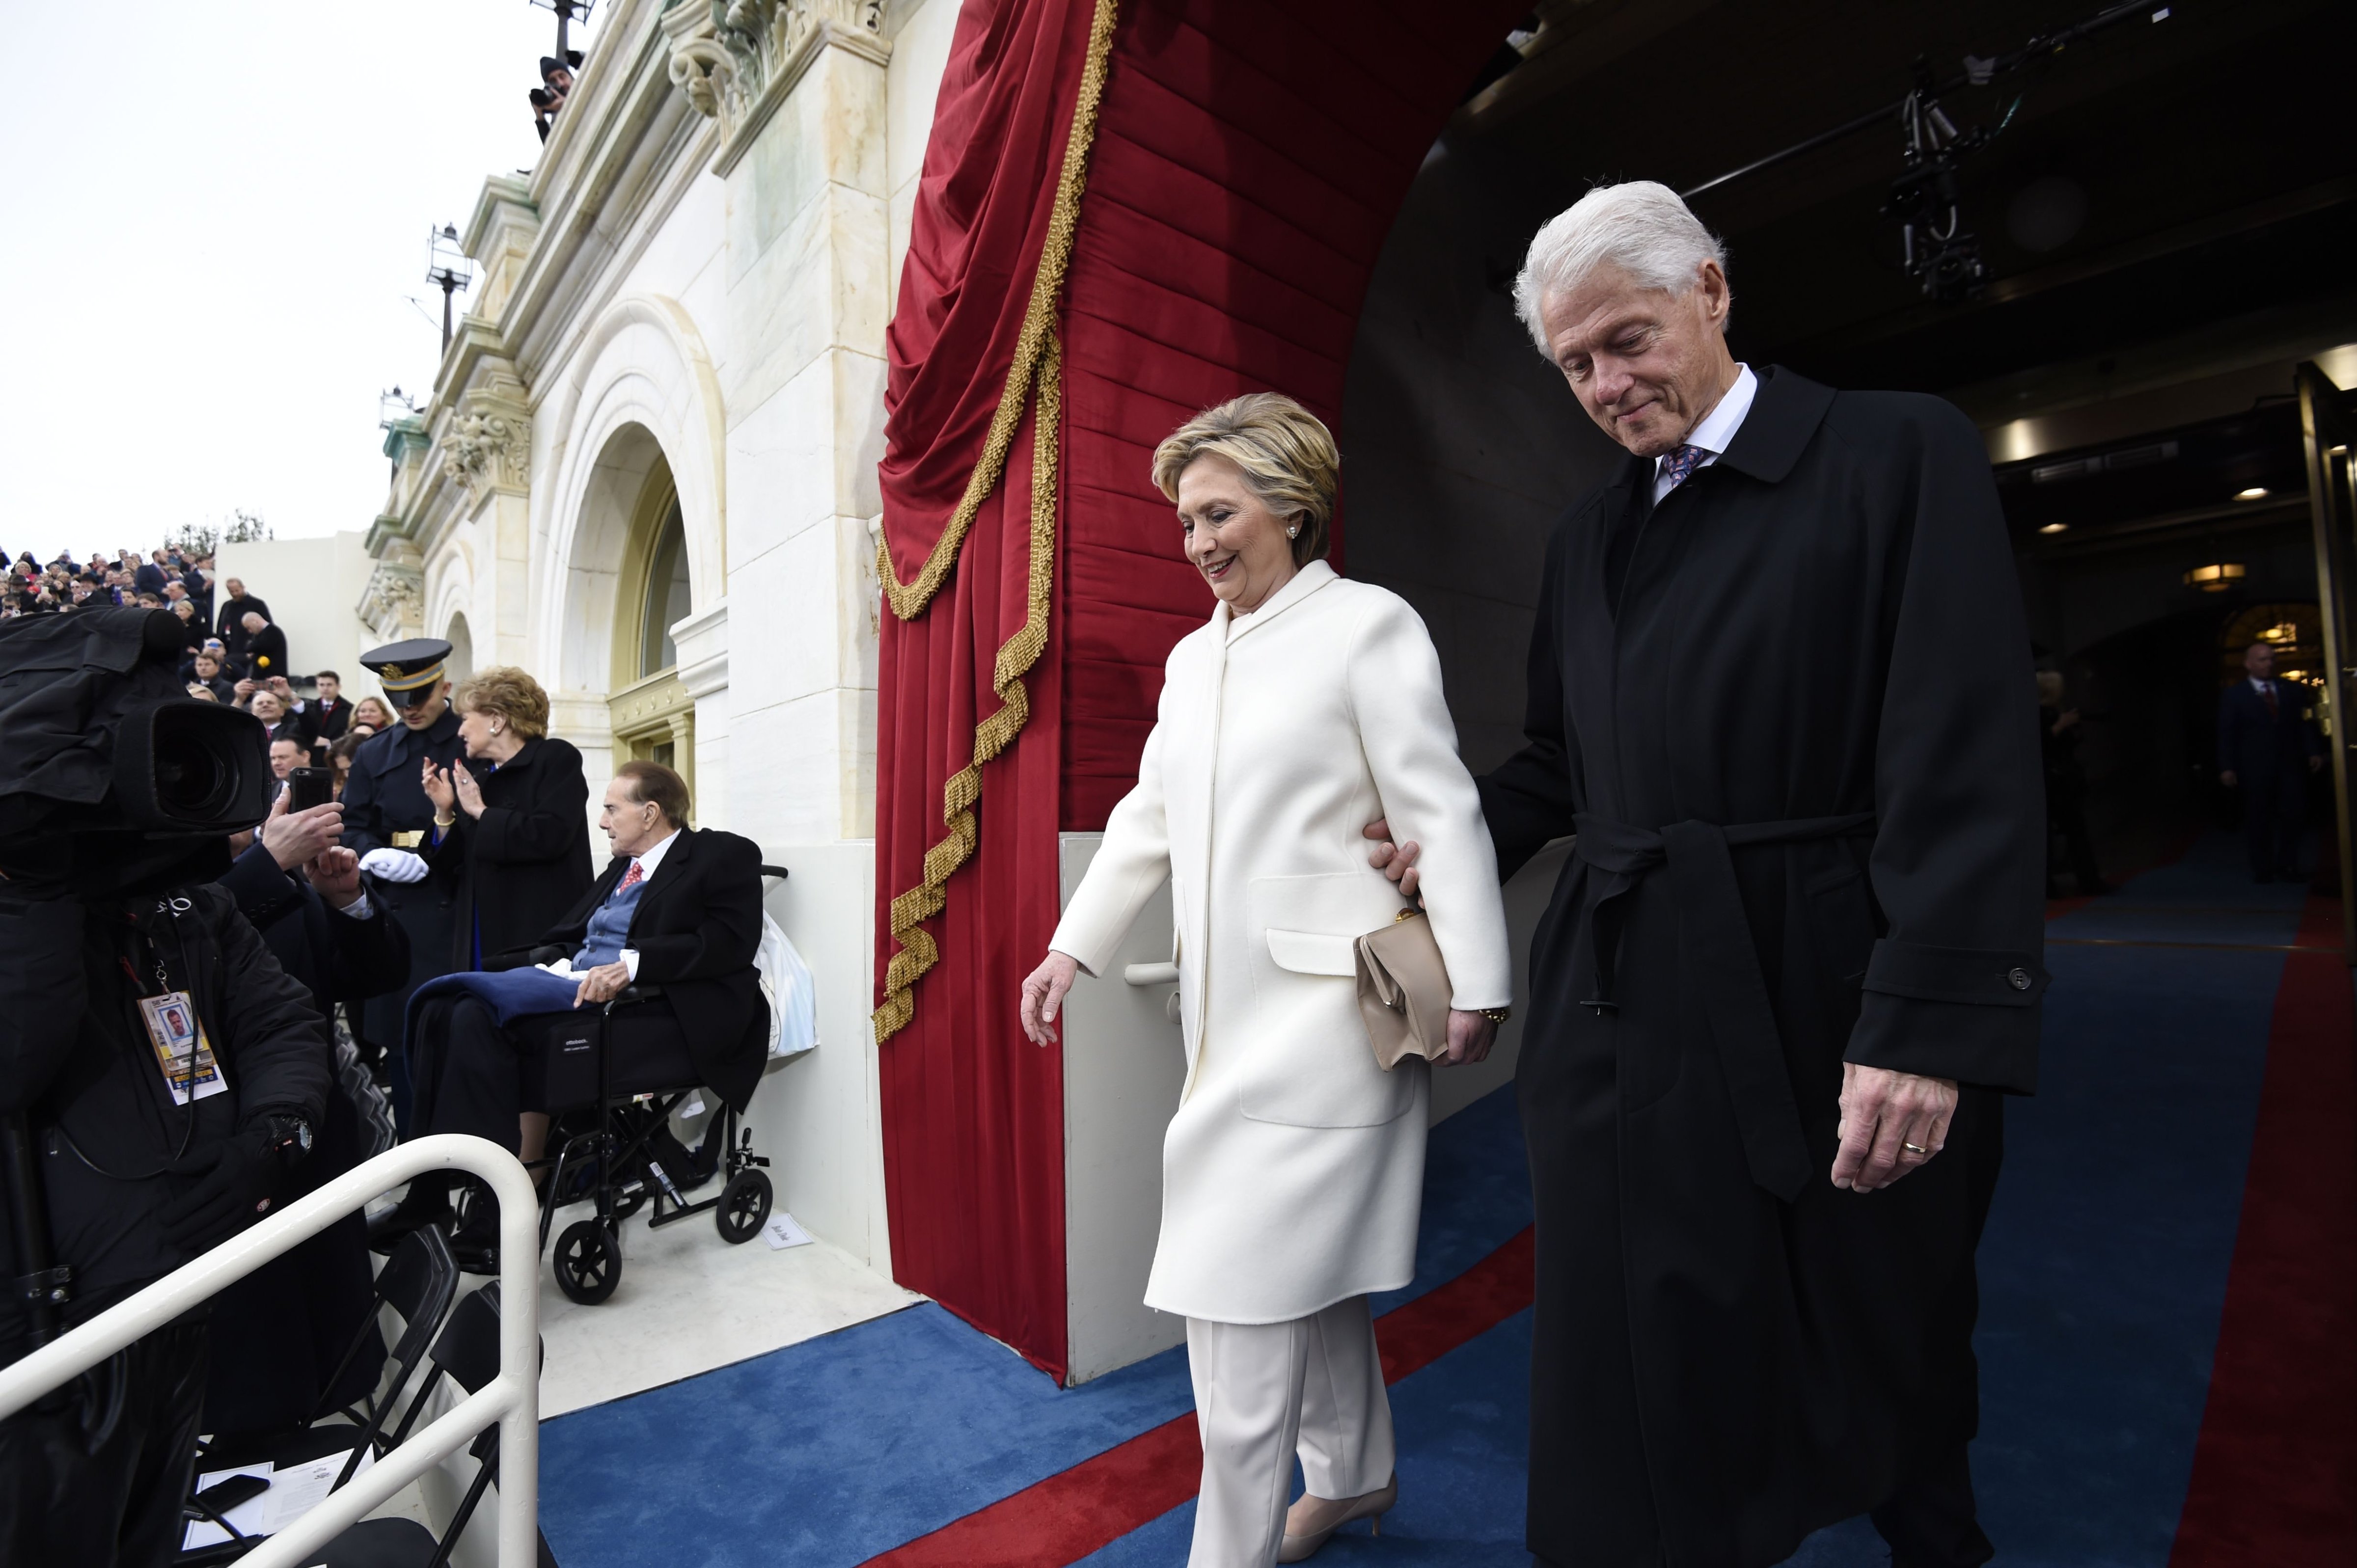 Former US President Bill Clinton and First Lady Hillary Clinton arrive for the Presidential Inauguration of Donald Trump at the US Capitol in Washington, DC, January 20, 2017. / AFP / POOL / SAUL LOEB (Photo credit should read SAUL LOEB/AFP/Getty Images) (SAUL LOEB—AFP/Getty Images)